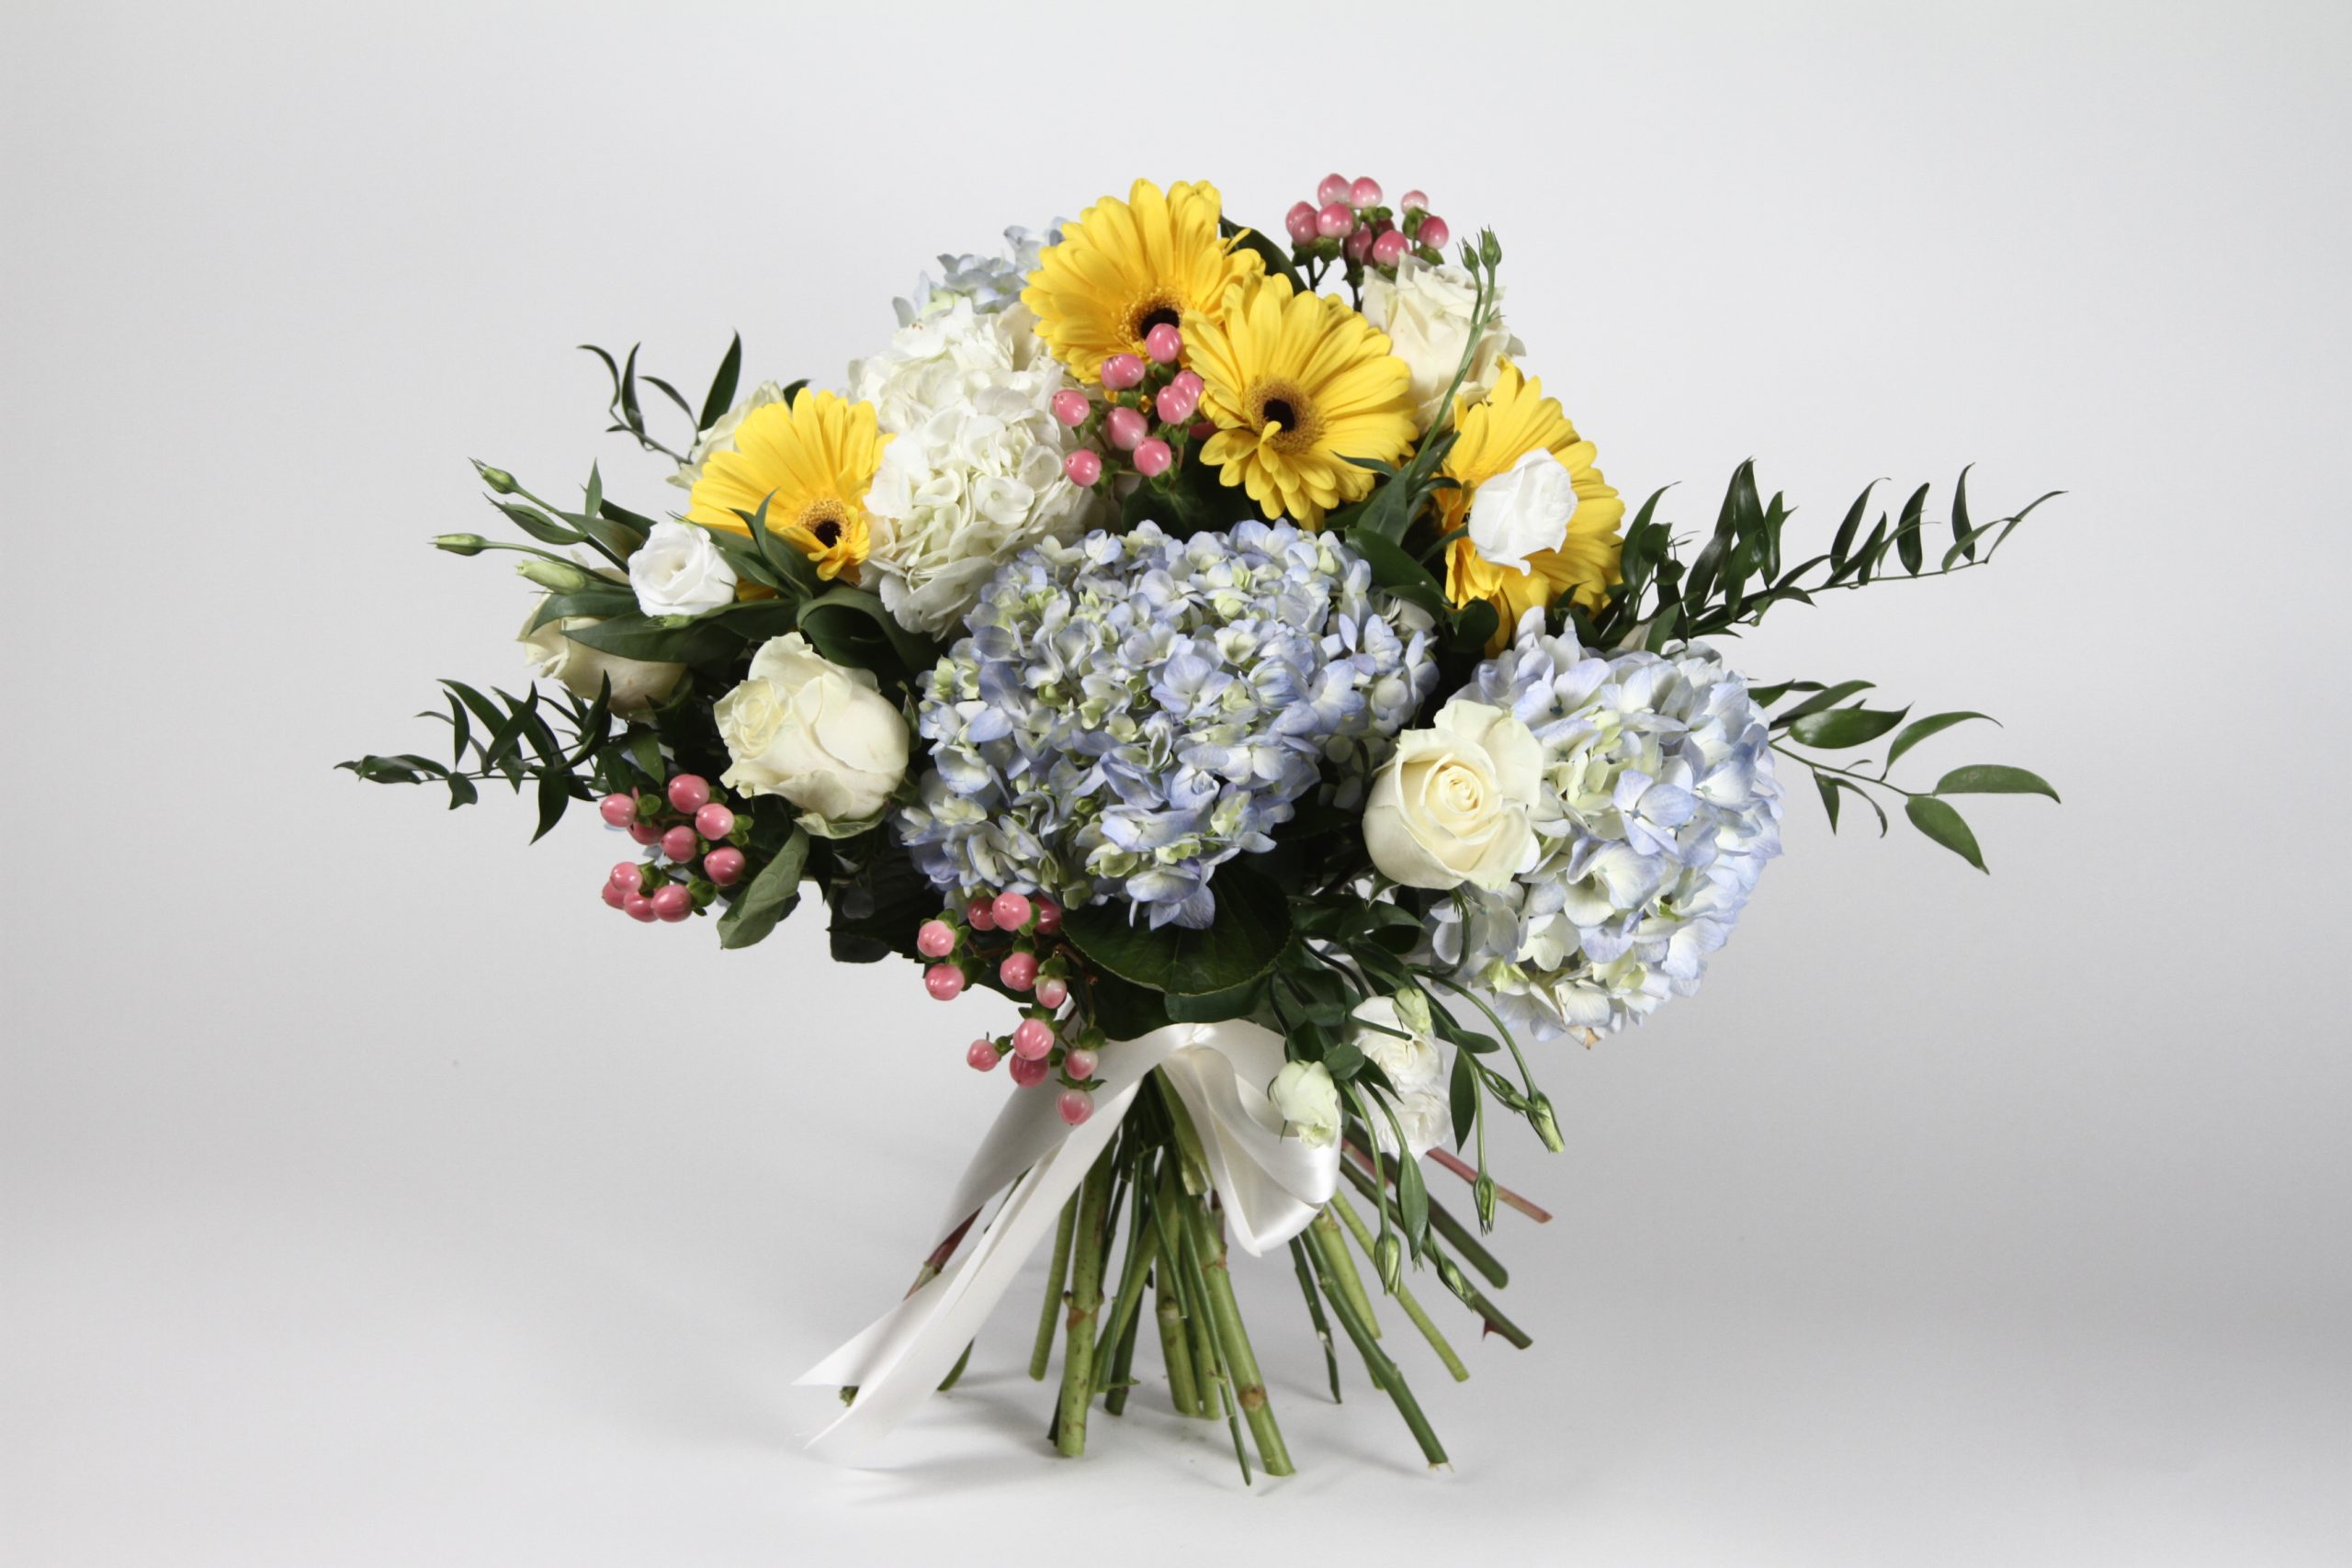 Passover Floral Gifts in Toronto & Arrangements For Wedding In Toronto